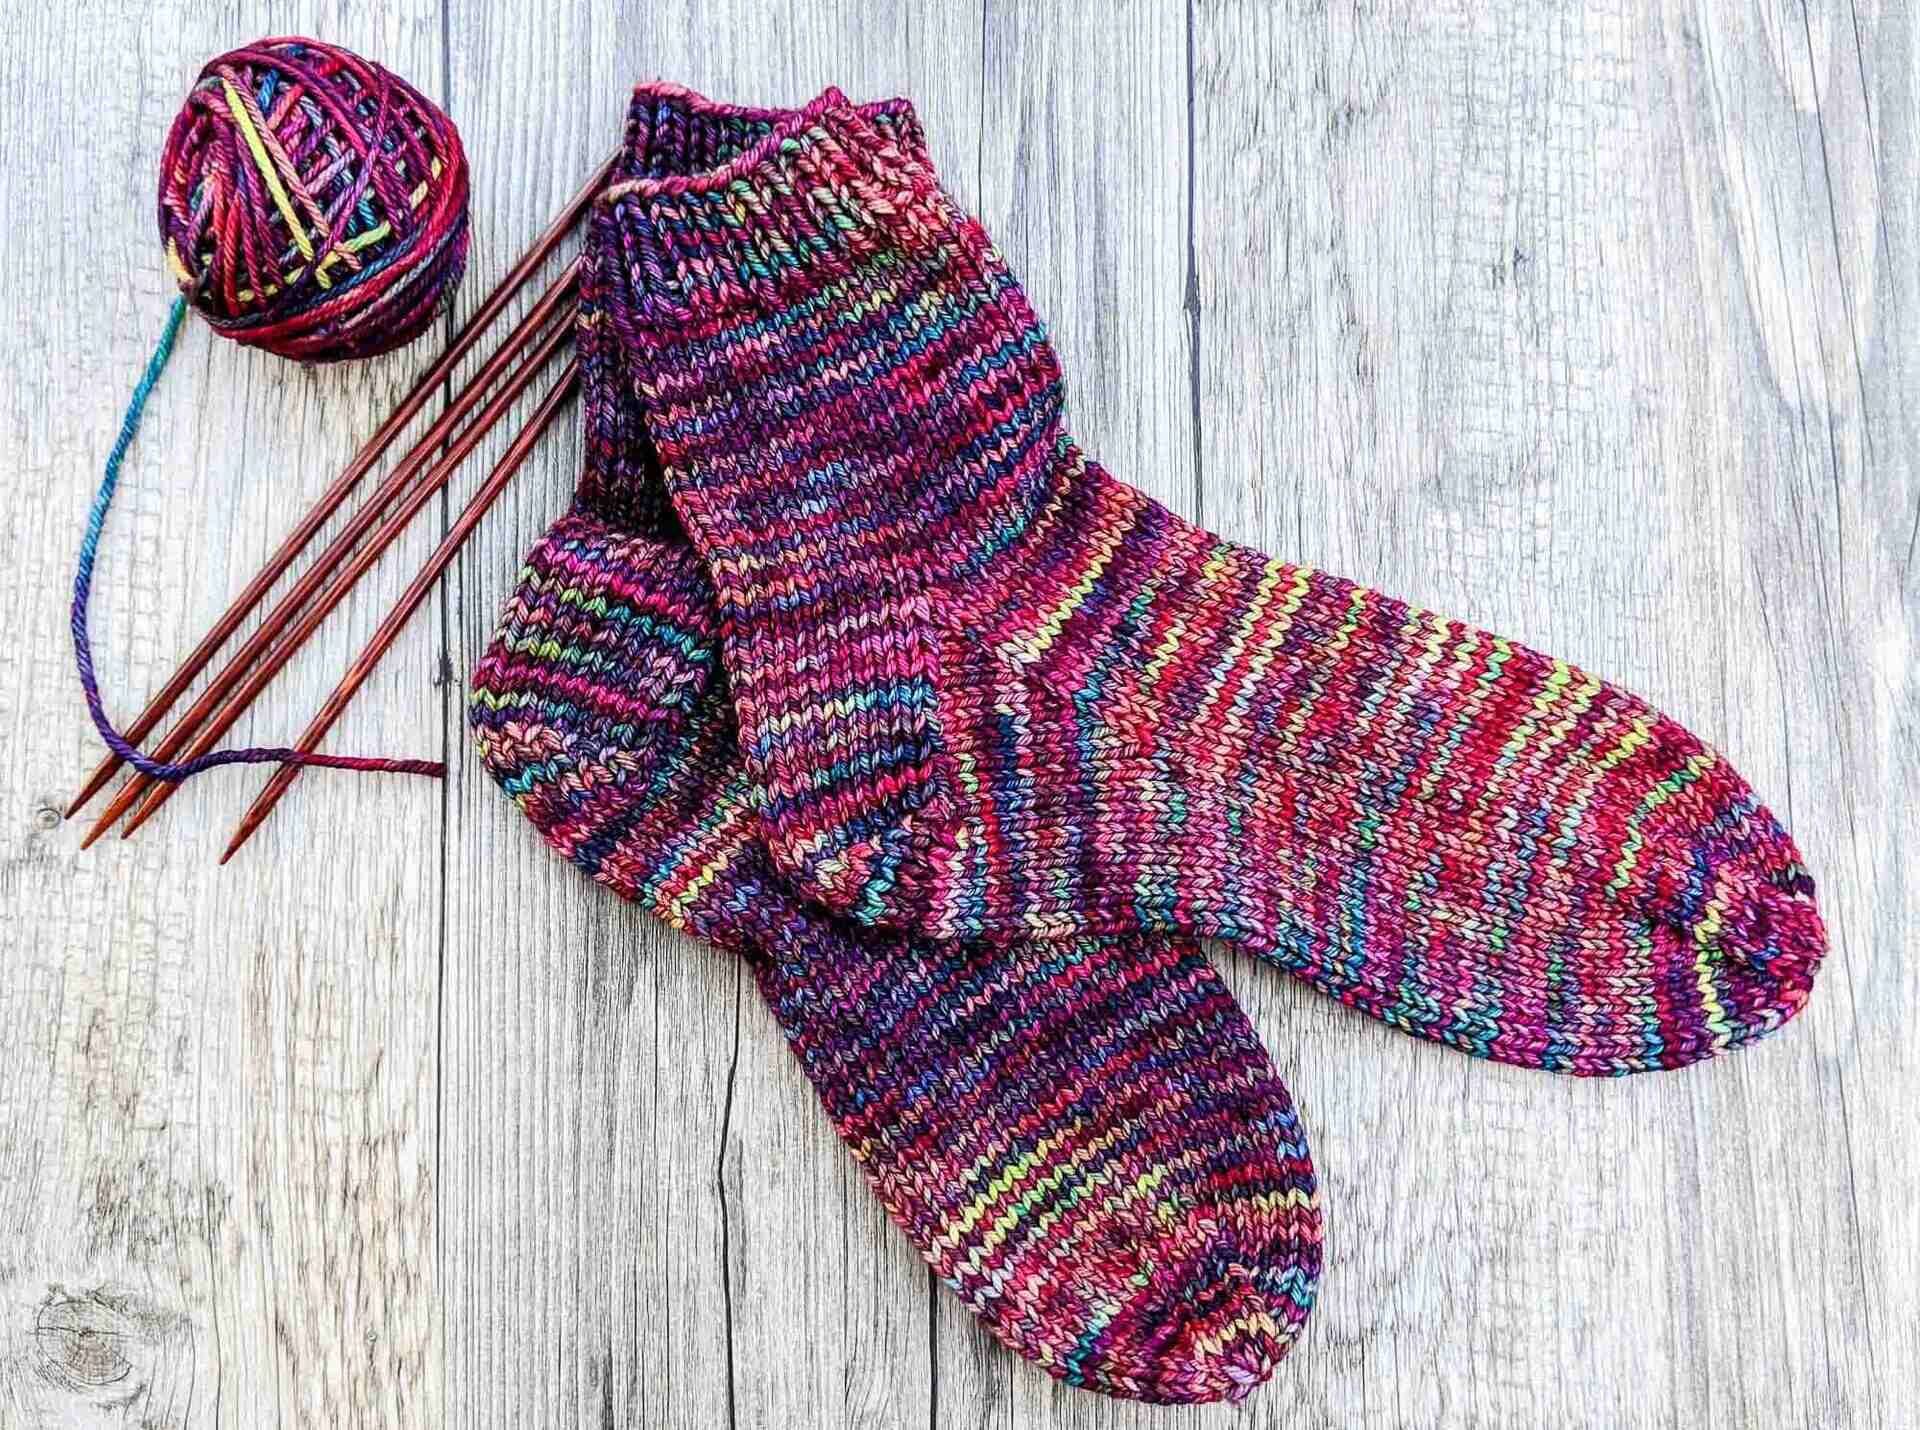 Crafting Royalty: Hand Knitted Socks Fit For An Emperor